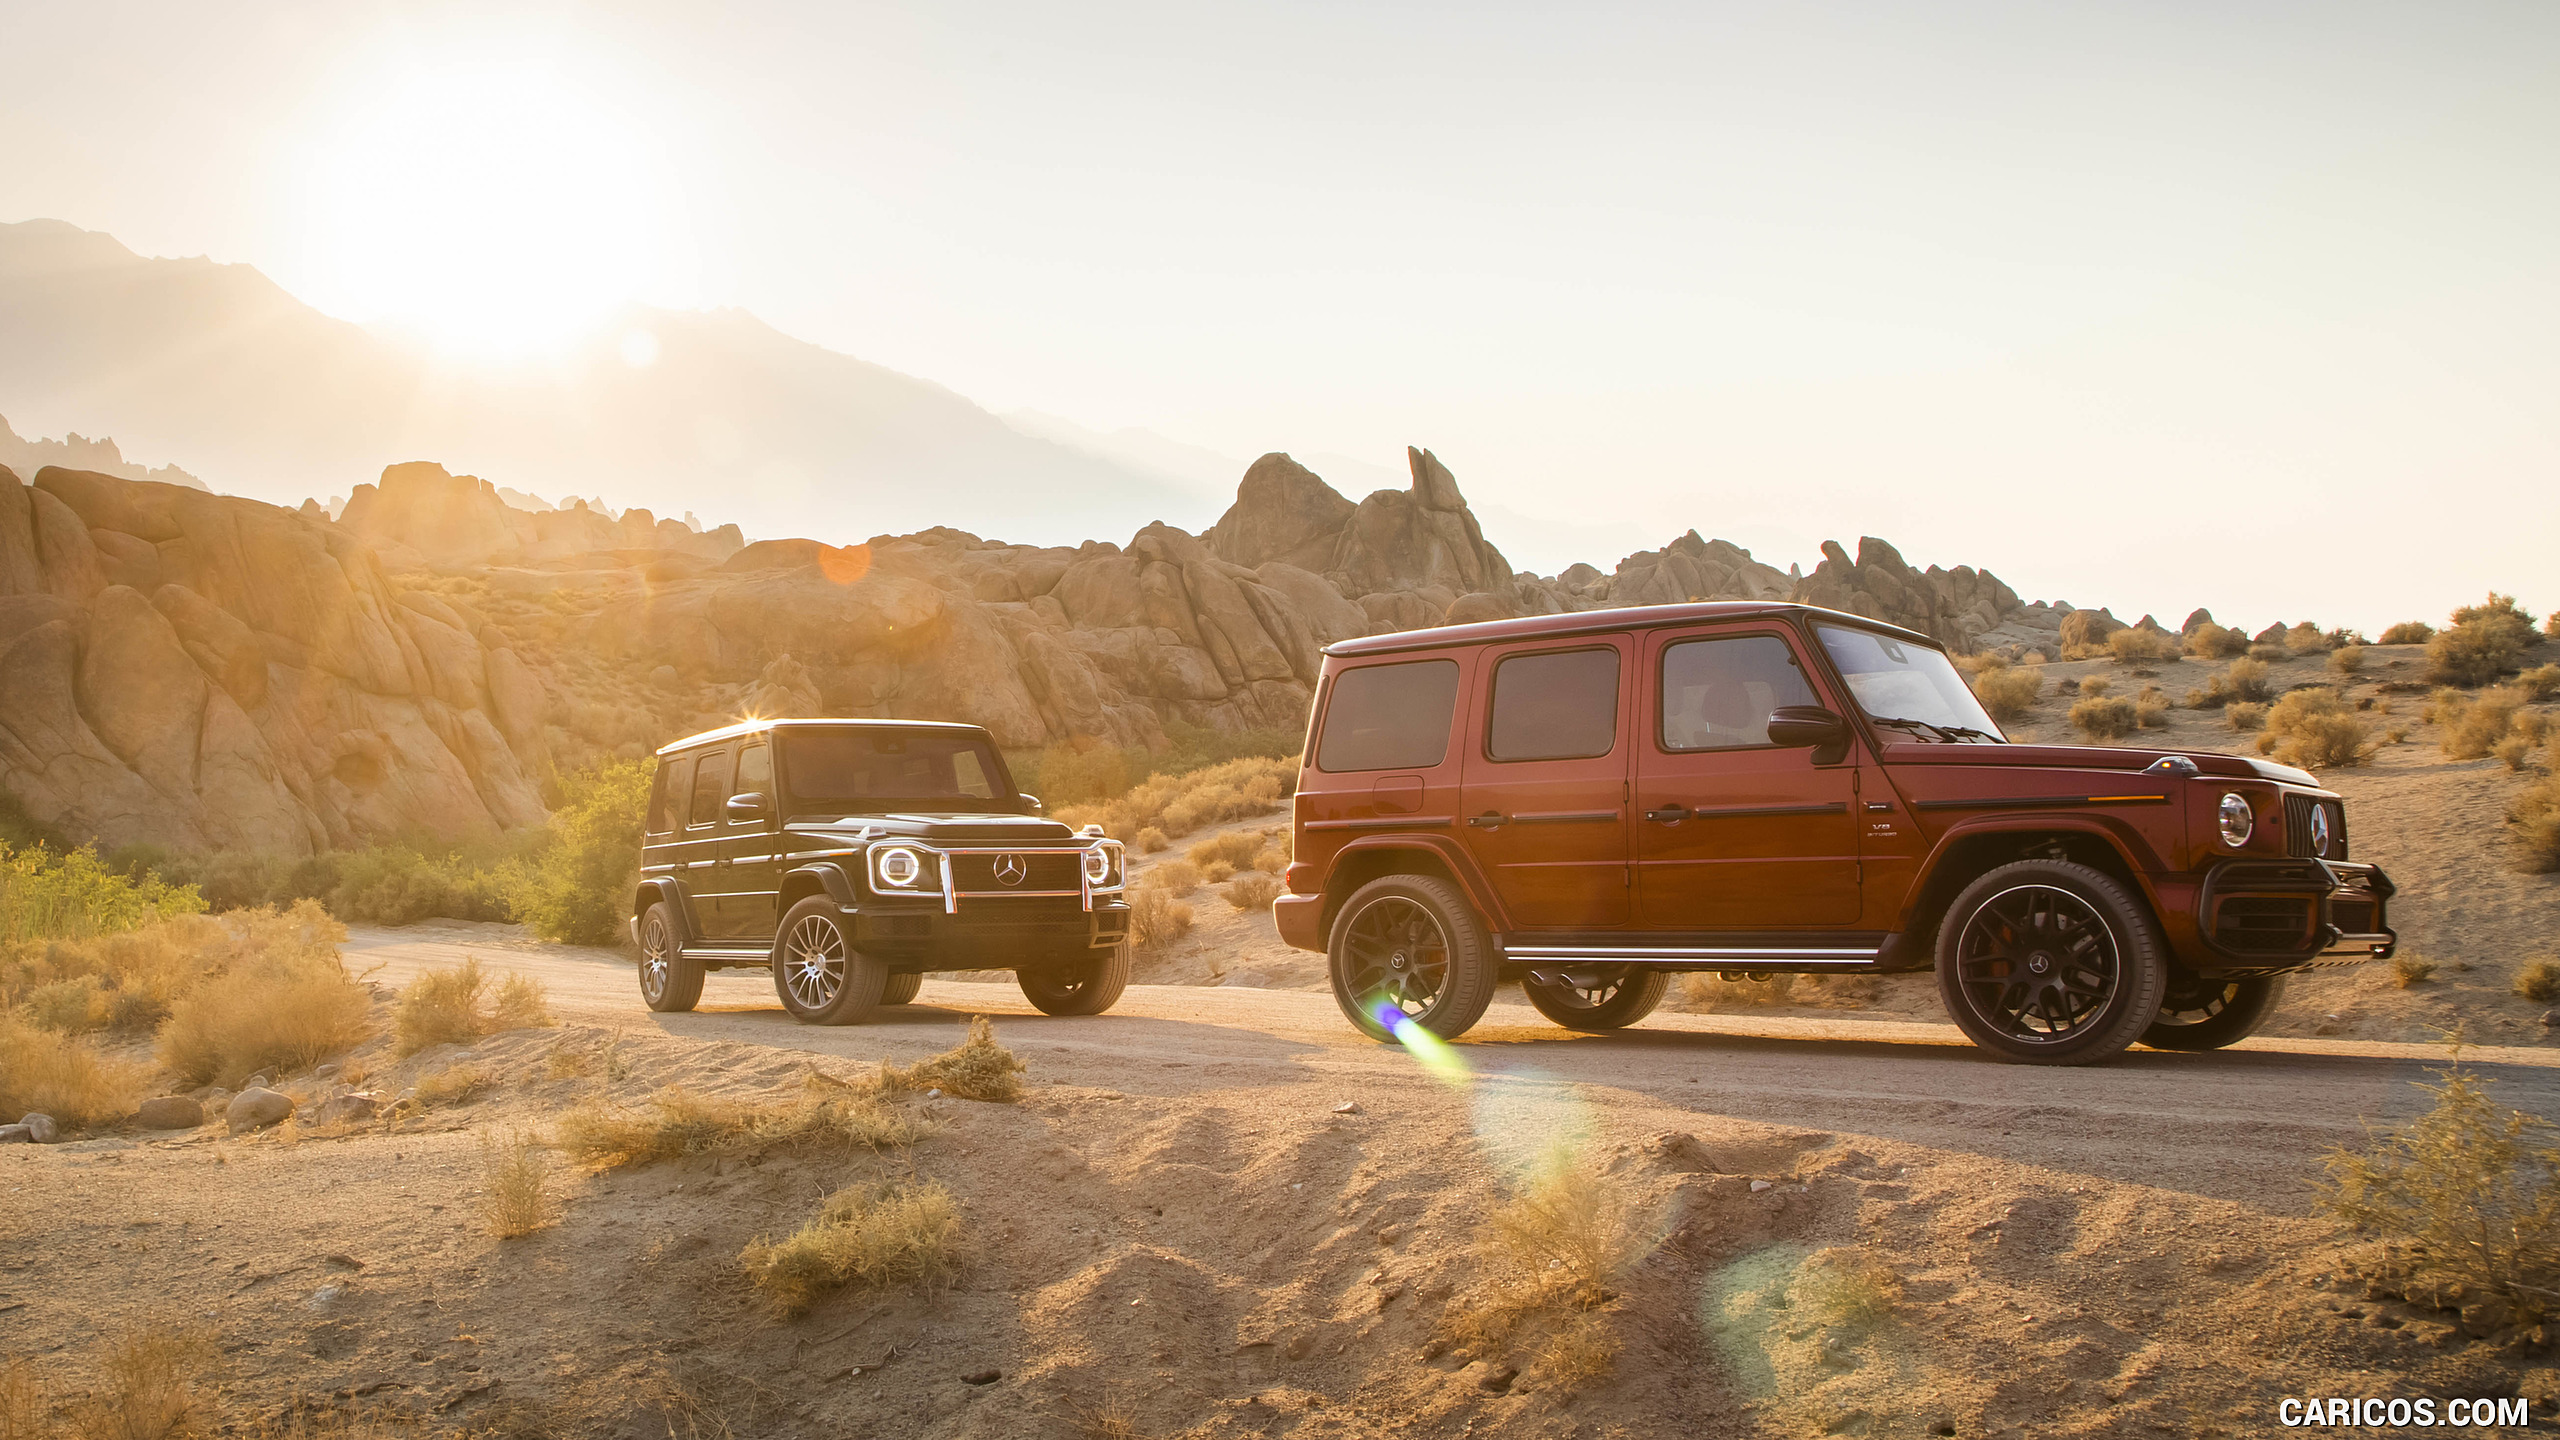 2019 Mercedes-AMG G63 (U.S.-Spec) and 2019 G550, #349 of 452